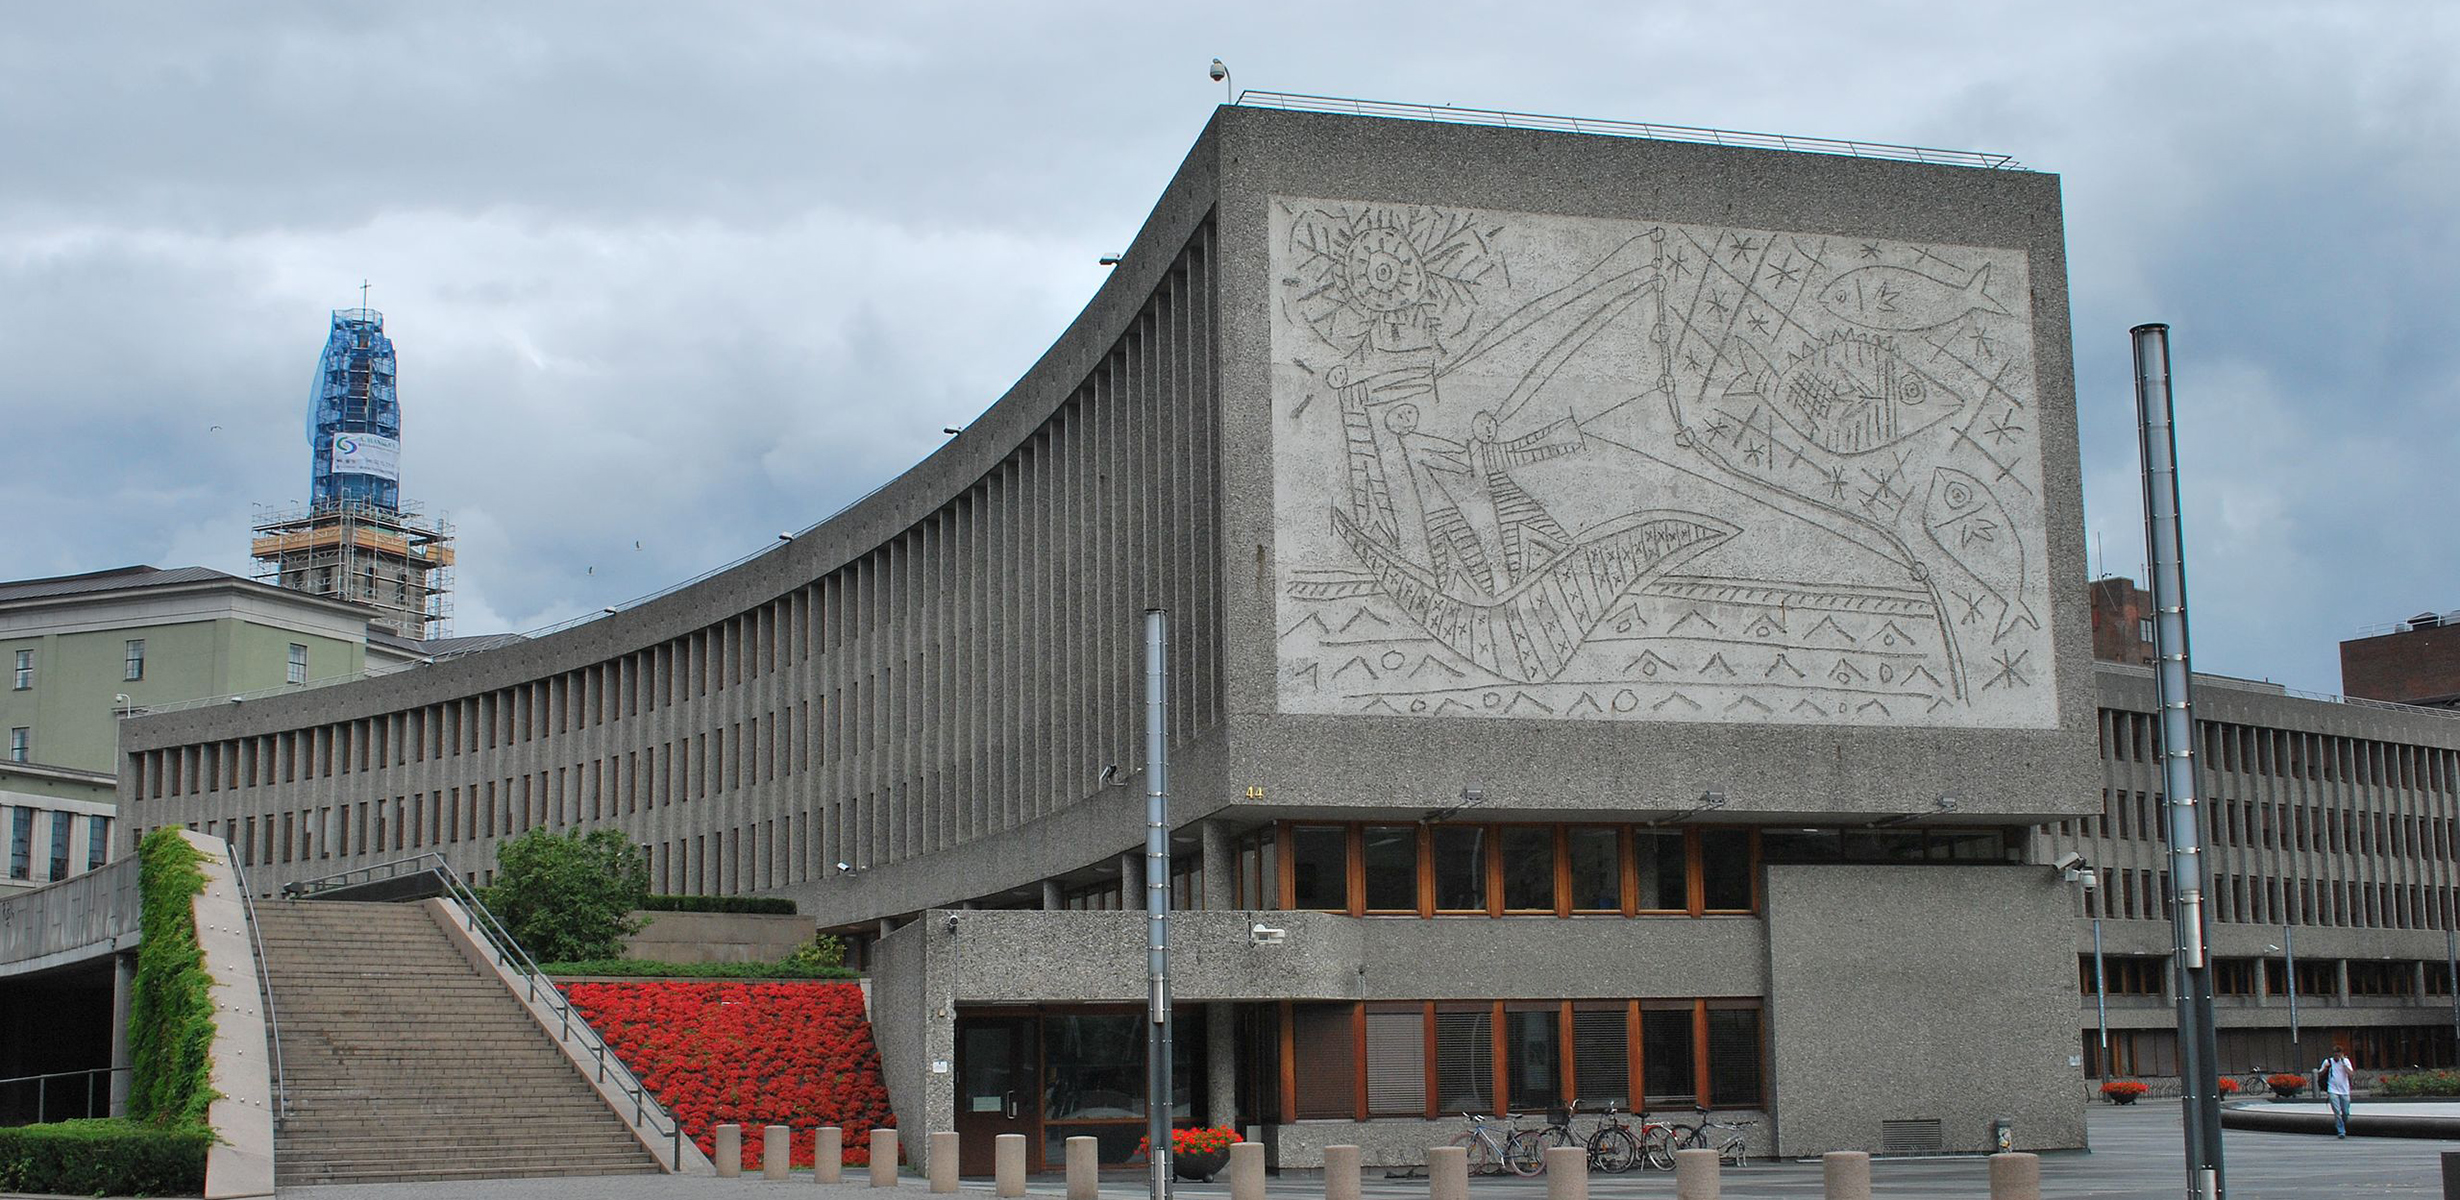 kapre Arbejdsgiver mirakel MoMA protests destruction of Norway's Picasso murals - ArtReview